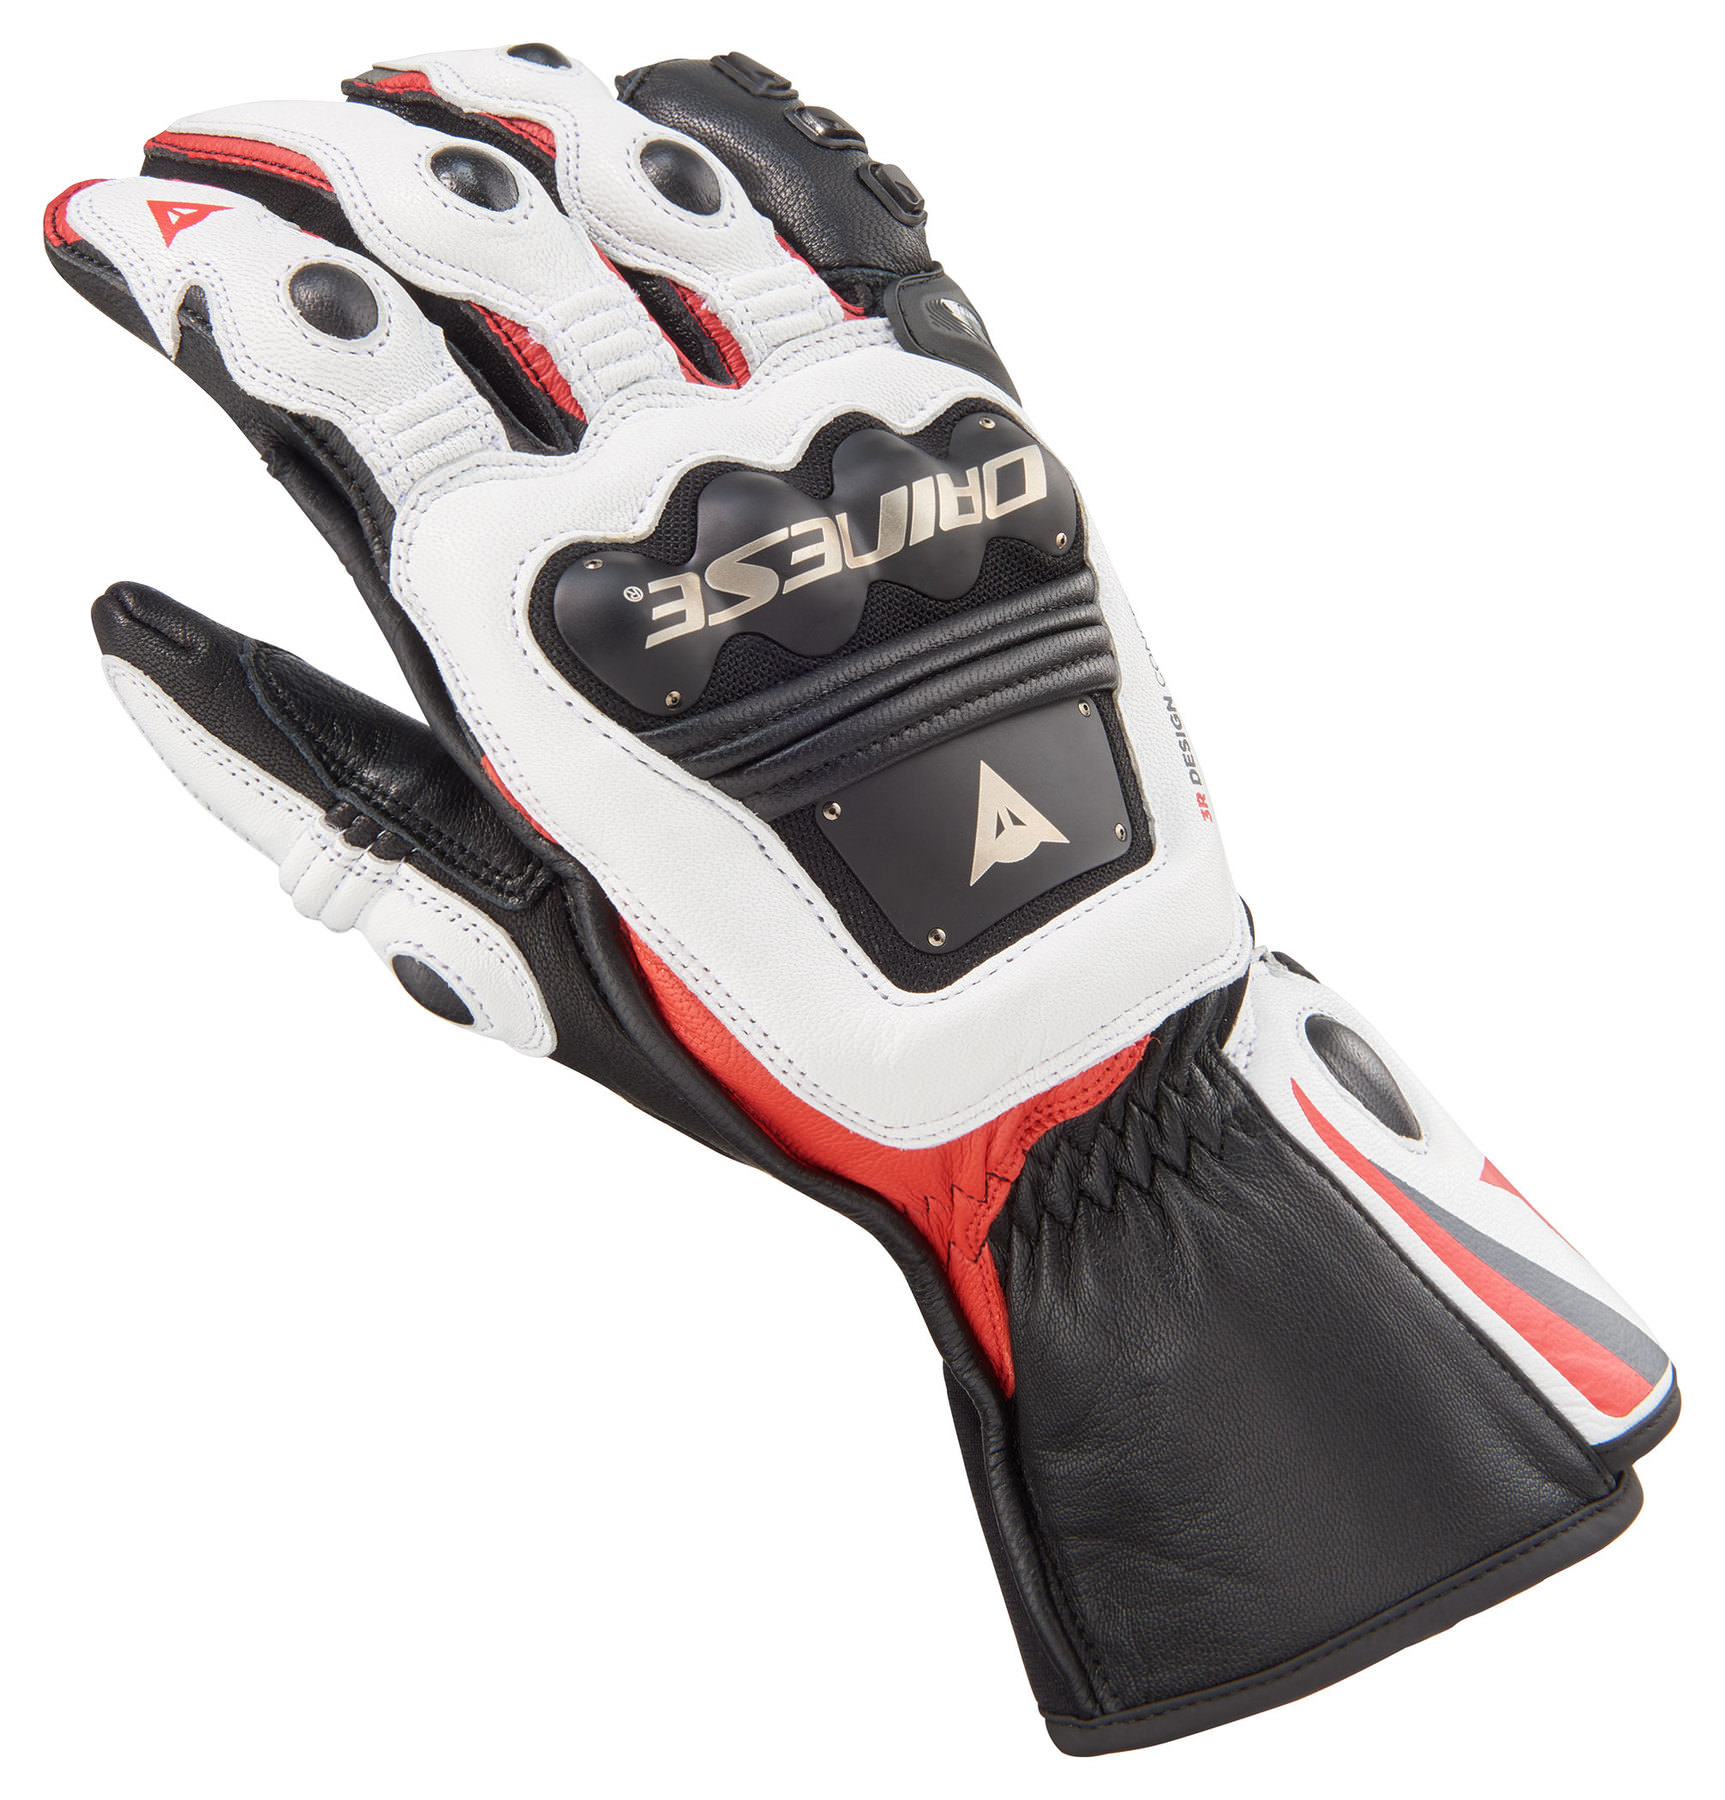 Buy Dainese Steel-Pro gloves | Louis motorcycle clothing and technology